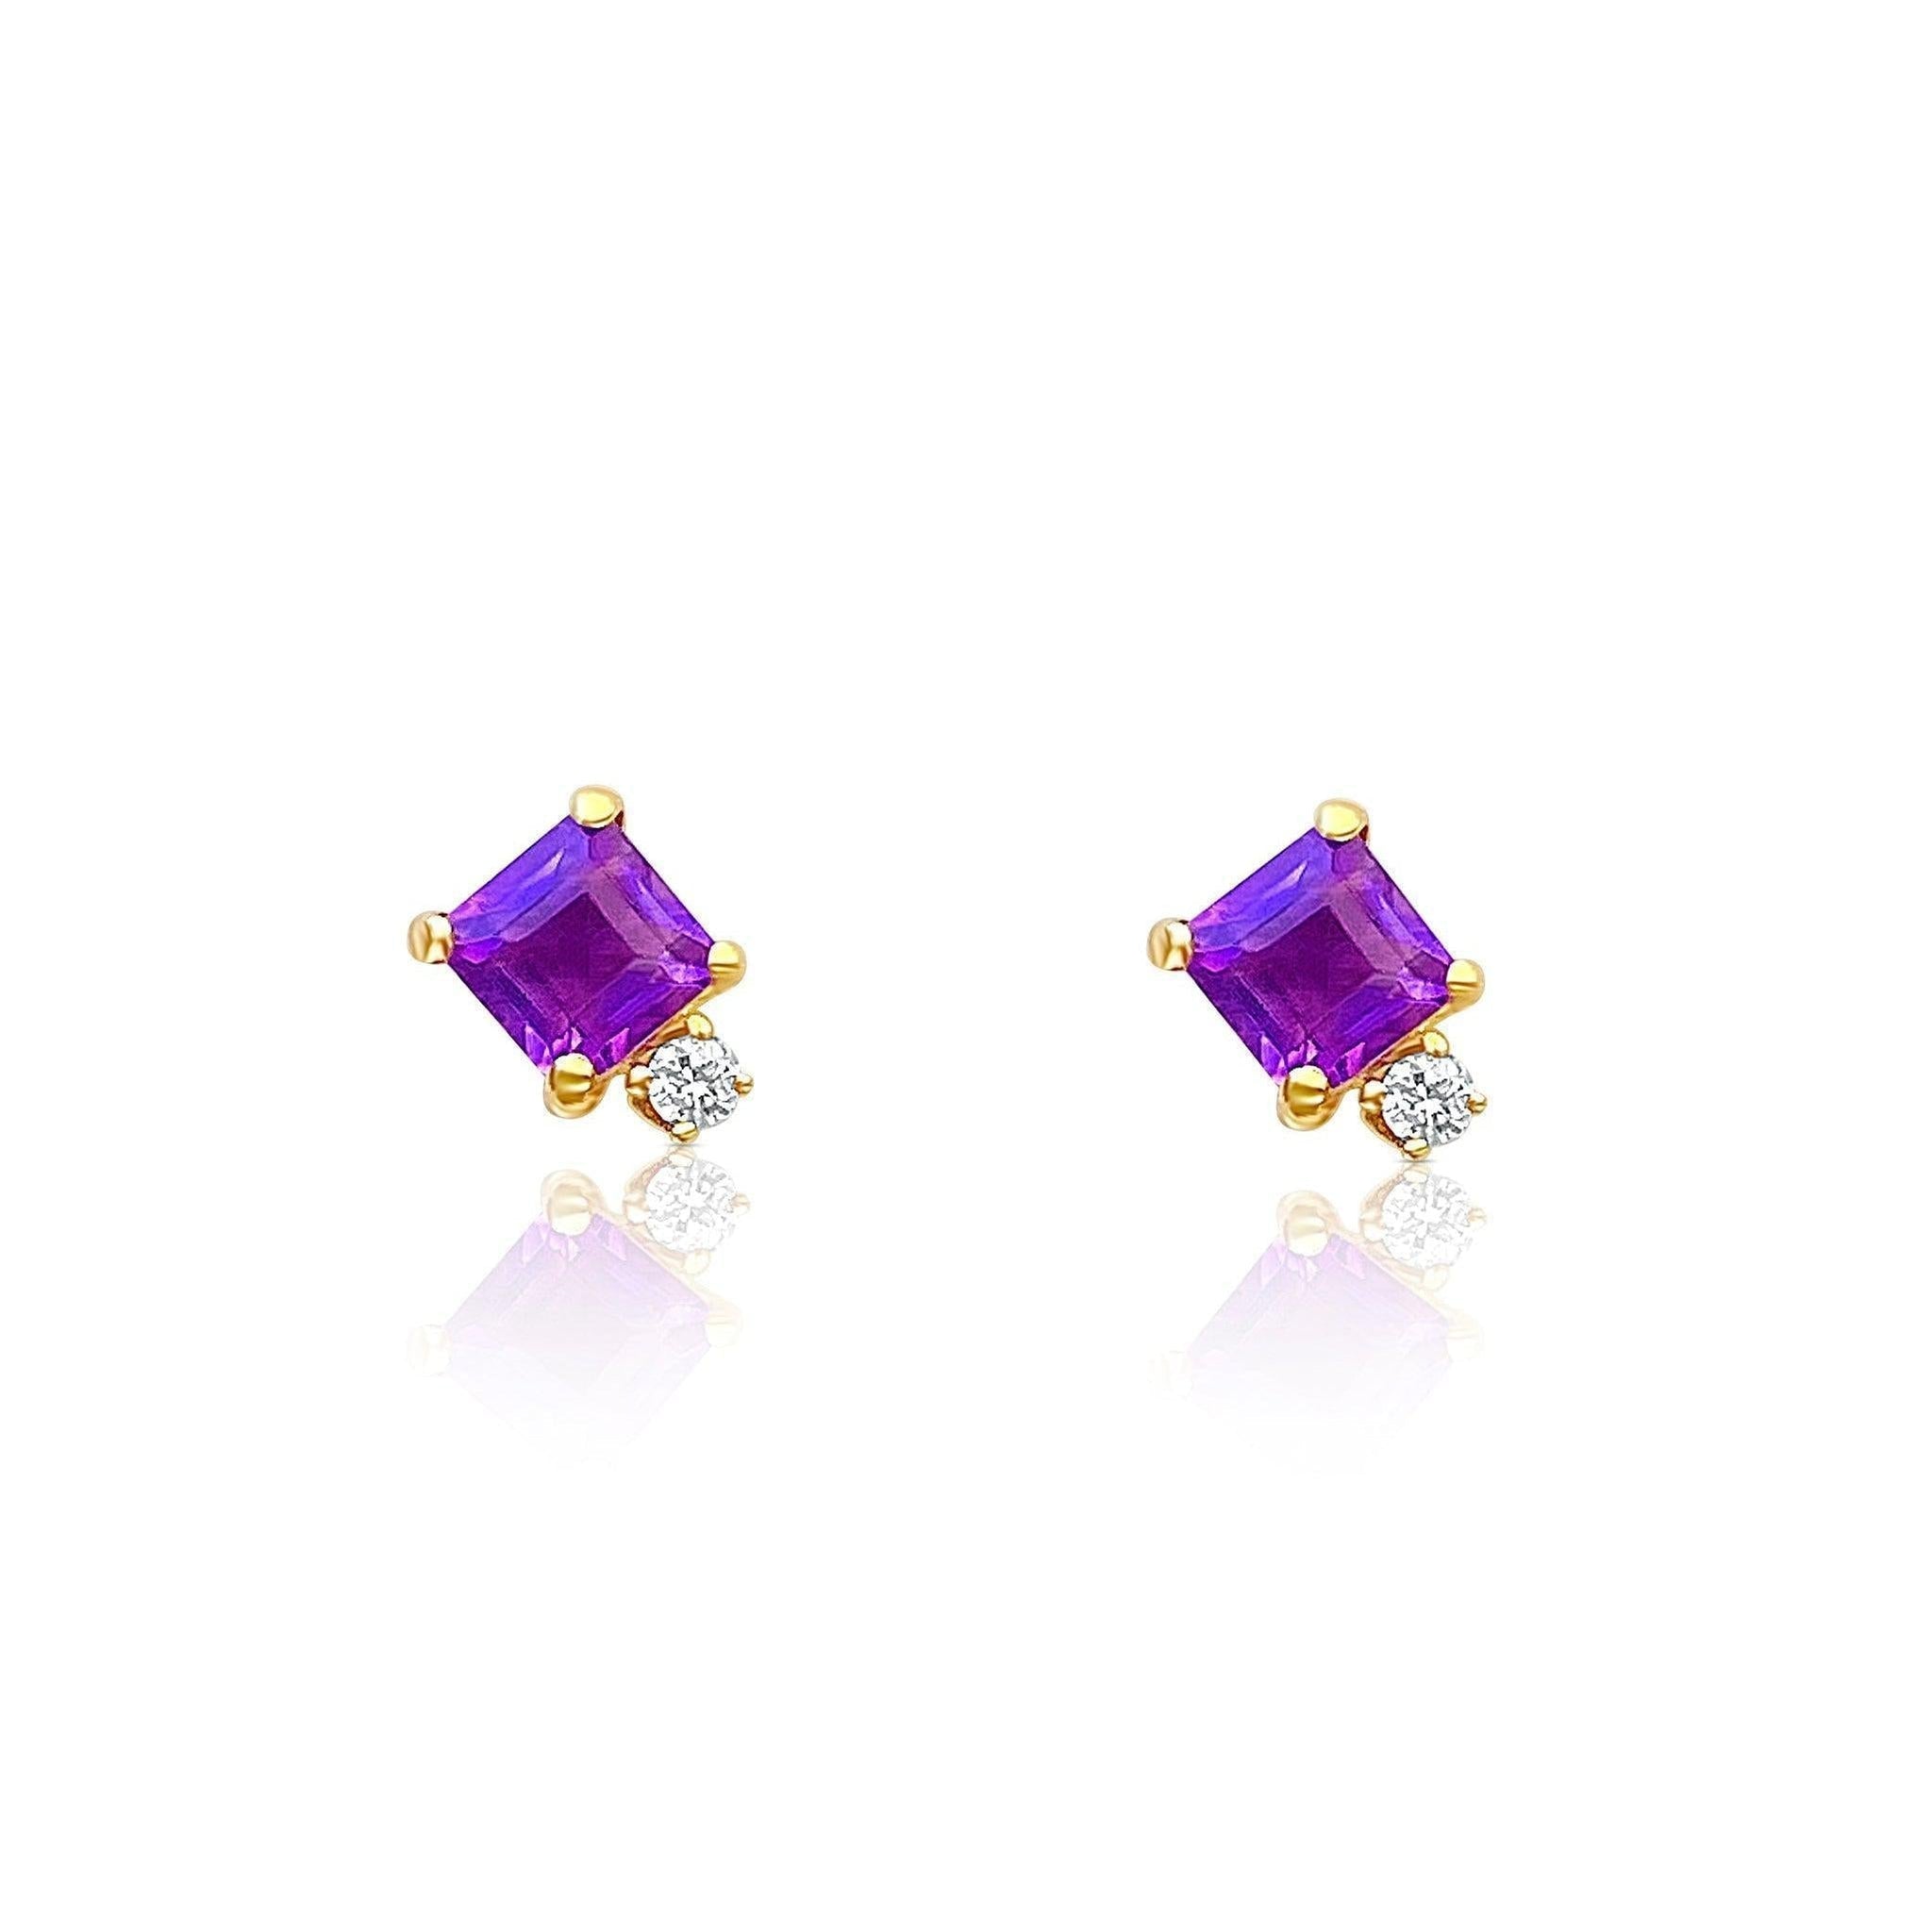 Square Purple Amethyst and Diamond Stud Earrings in 14k gold setting - ASSAY